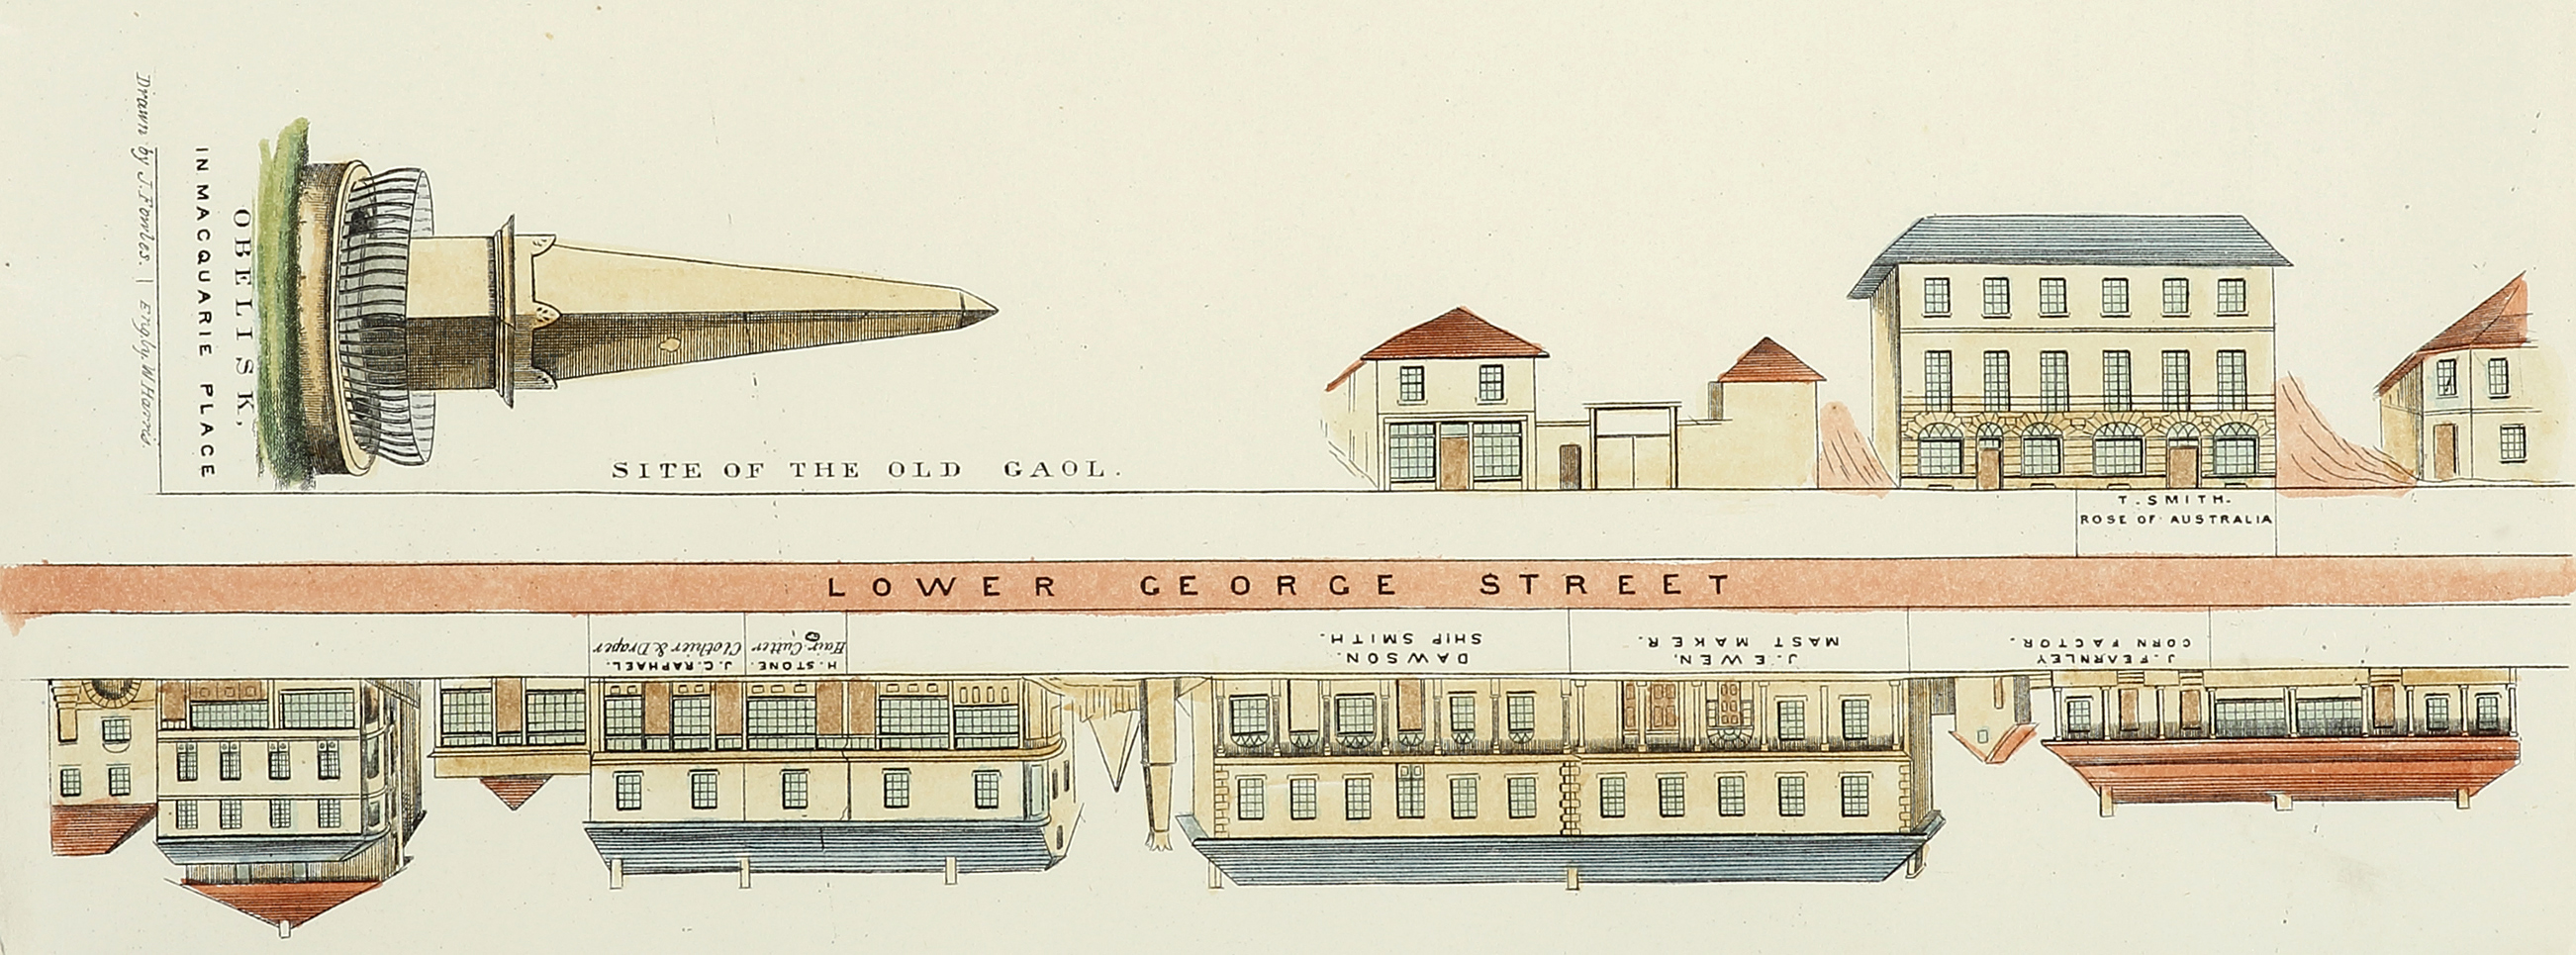 Lower George Street - Antique Print from 1878